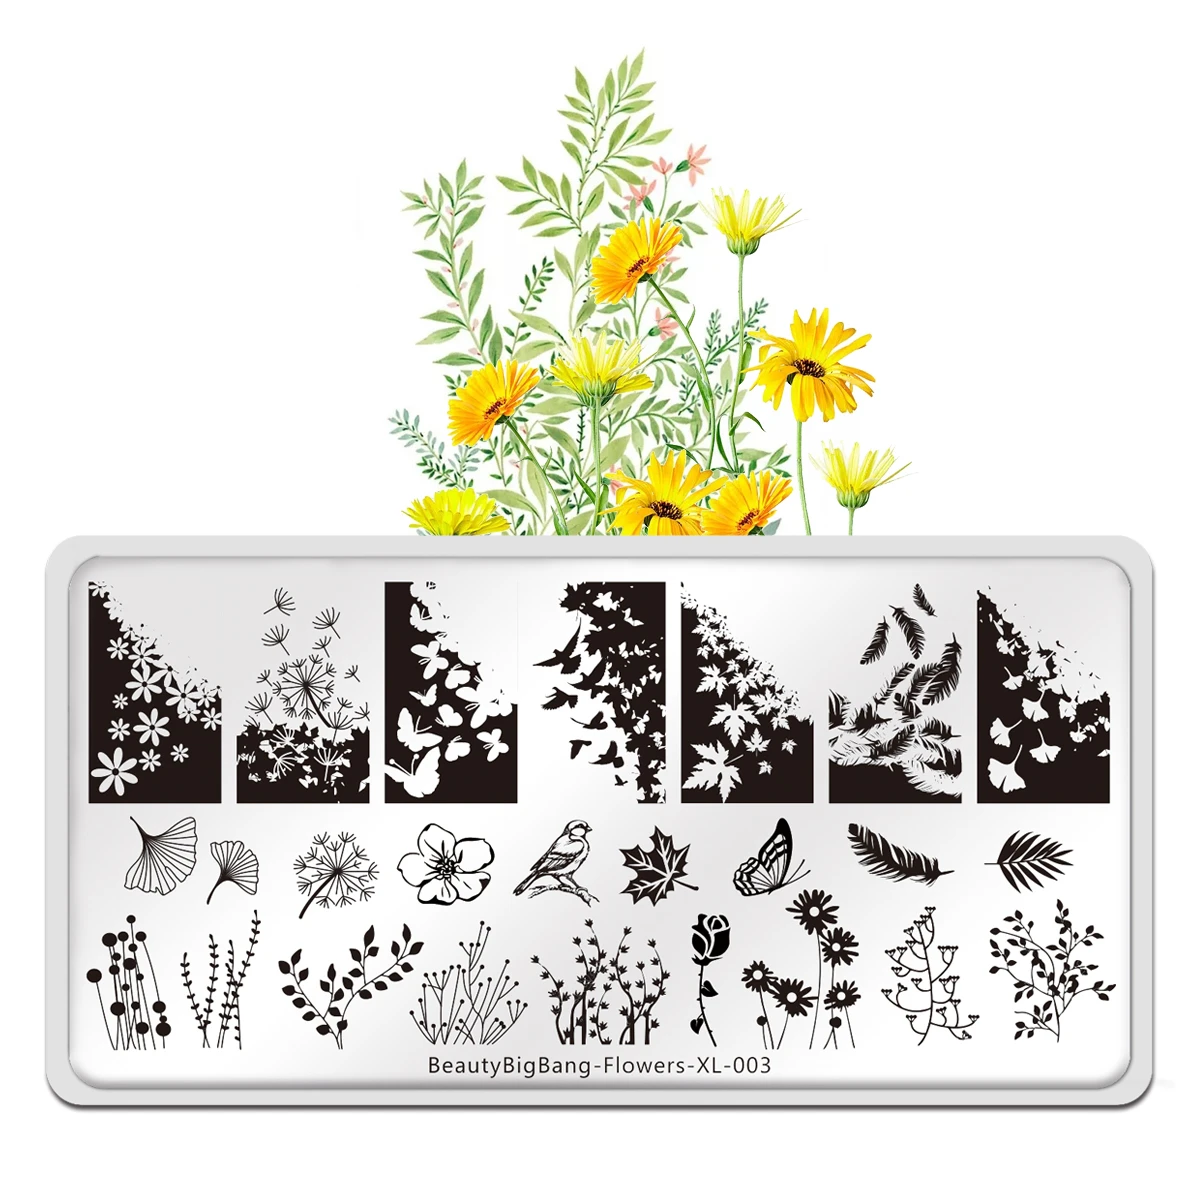 Beauty Big Bang Flower XL-003 Stamping Plates Leaves Tree Bird Dandelion Plants Image Stainless Steel Stencil Nail Art Template